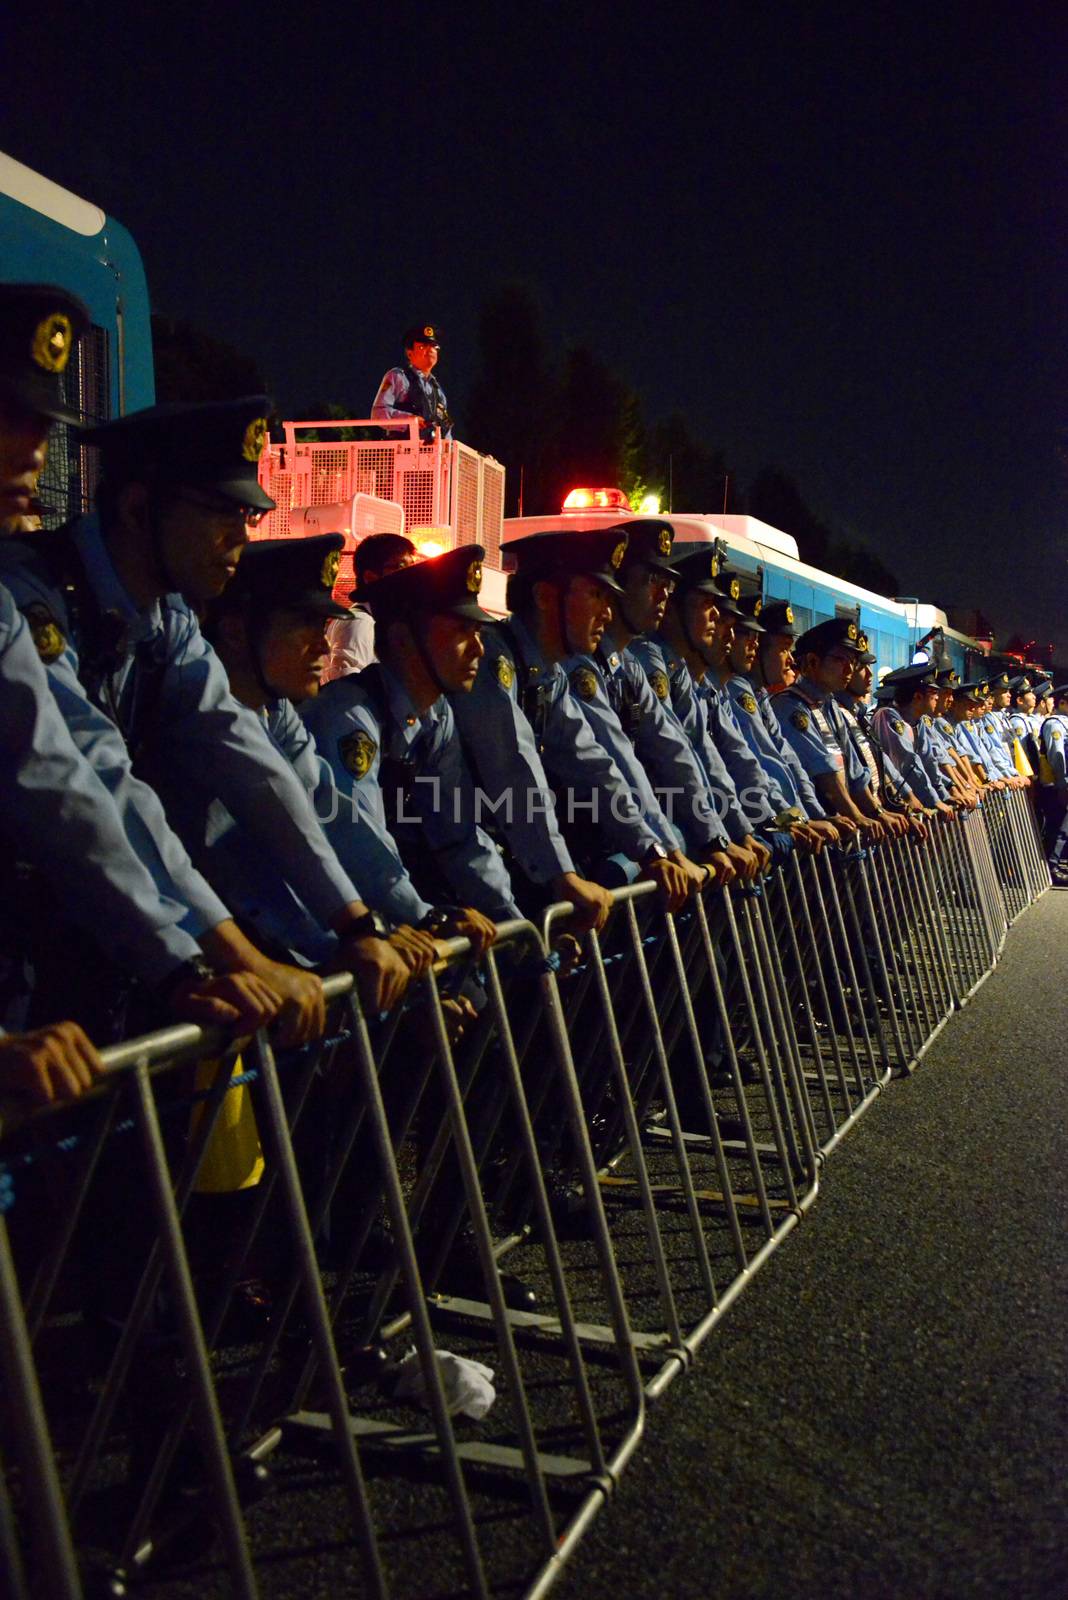 JAPAN, Tokyo: Police officers stand in line behind barriers near Japanese parliament in Tokyo, Japan, on September 14, 2015 during a demonstration against security law. Demonstrators claim Japanese Prime minister Shinzo Abe's resignation.